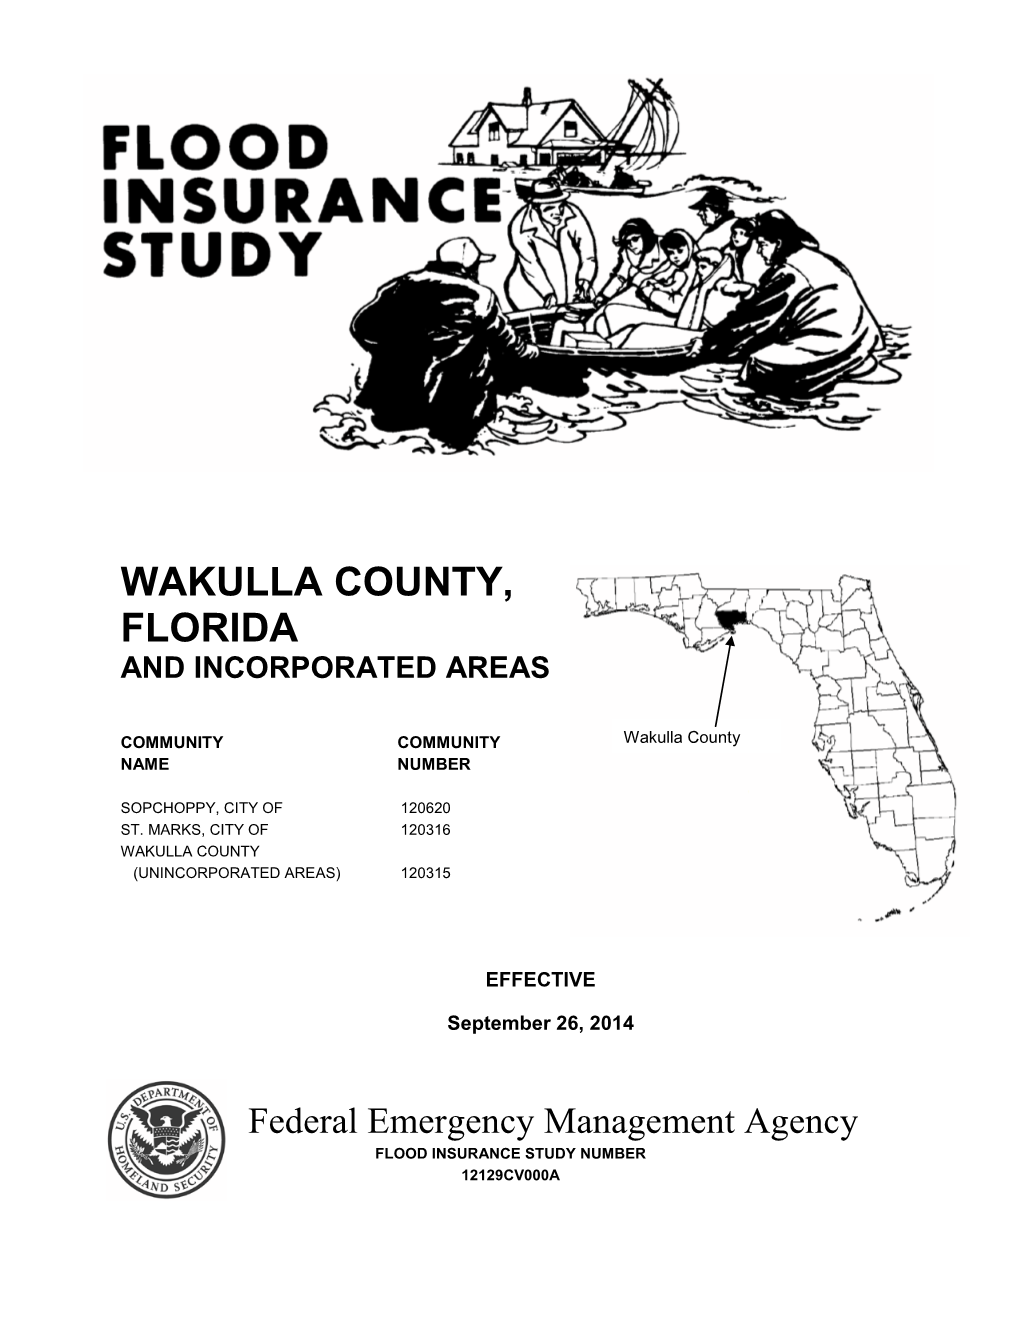 Wakulla County, Florida and Incorporated Areas